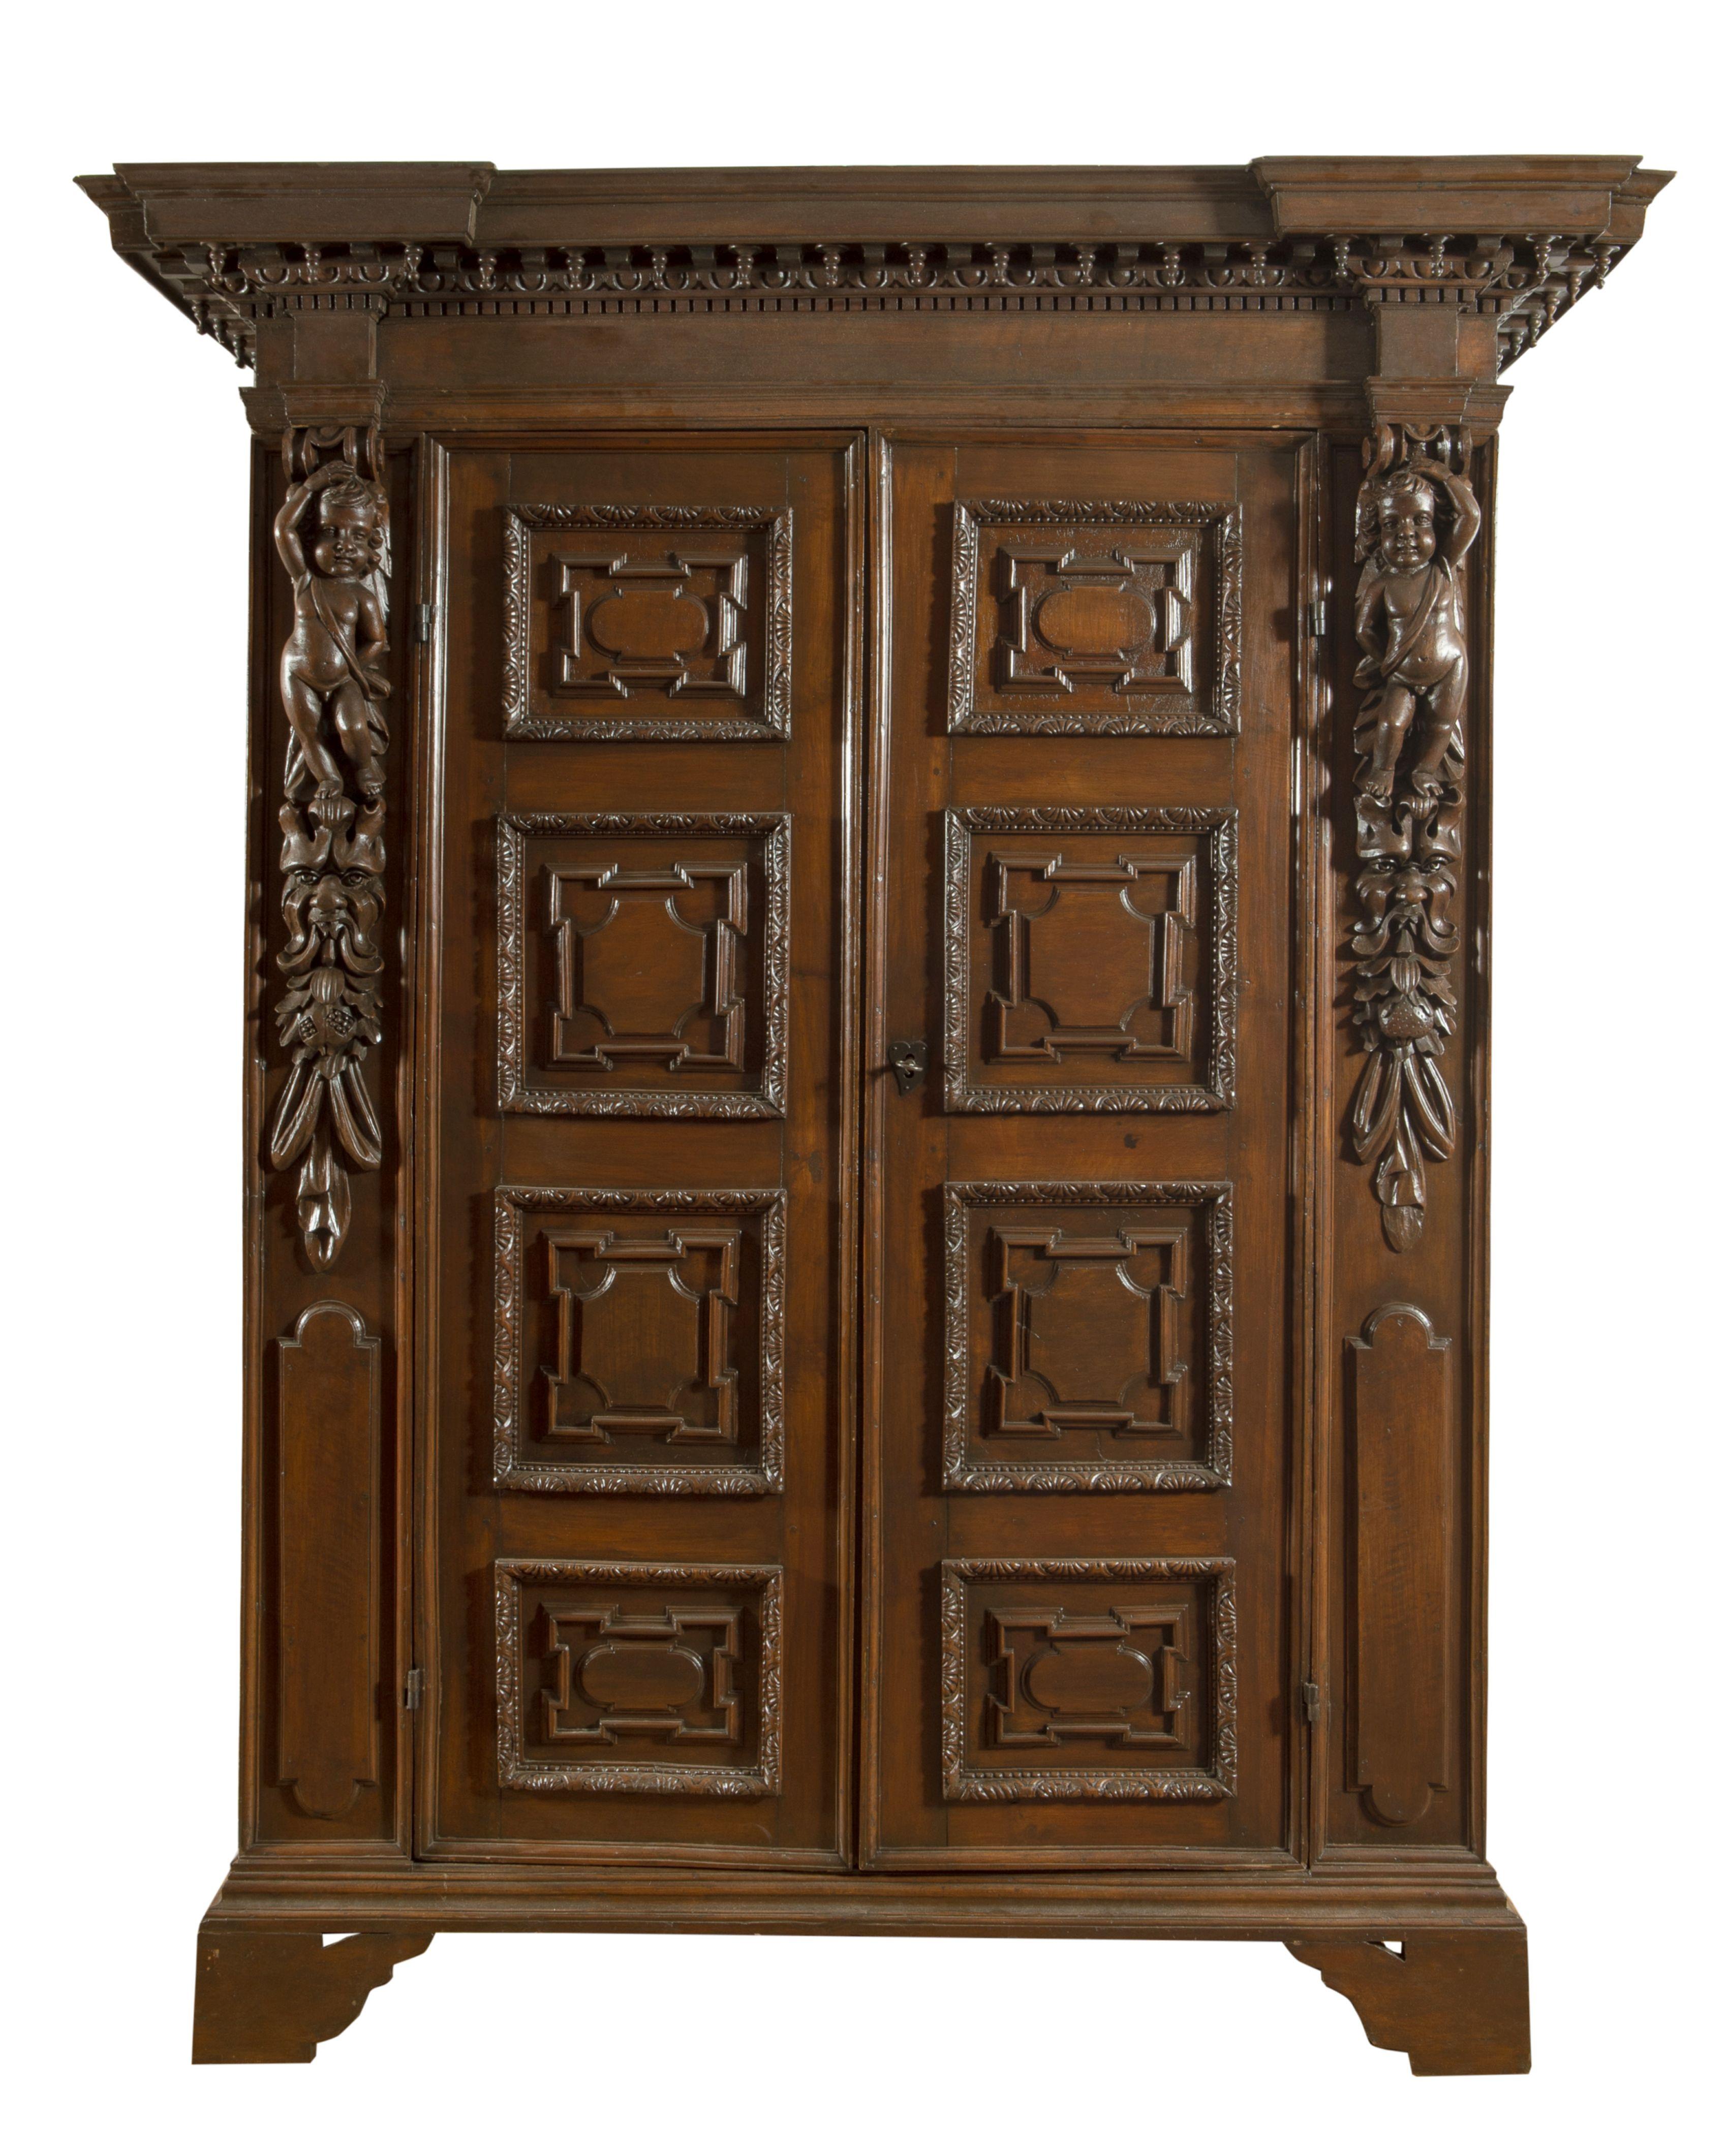 Italian, bergamasque wardrobe in solid walnut, made in the 17th century, measuring 240 x 165 x 65 cm, refined and elegant in every part including the superb construction of the hat.

This characteristic almost always present in the flaps and in